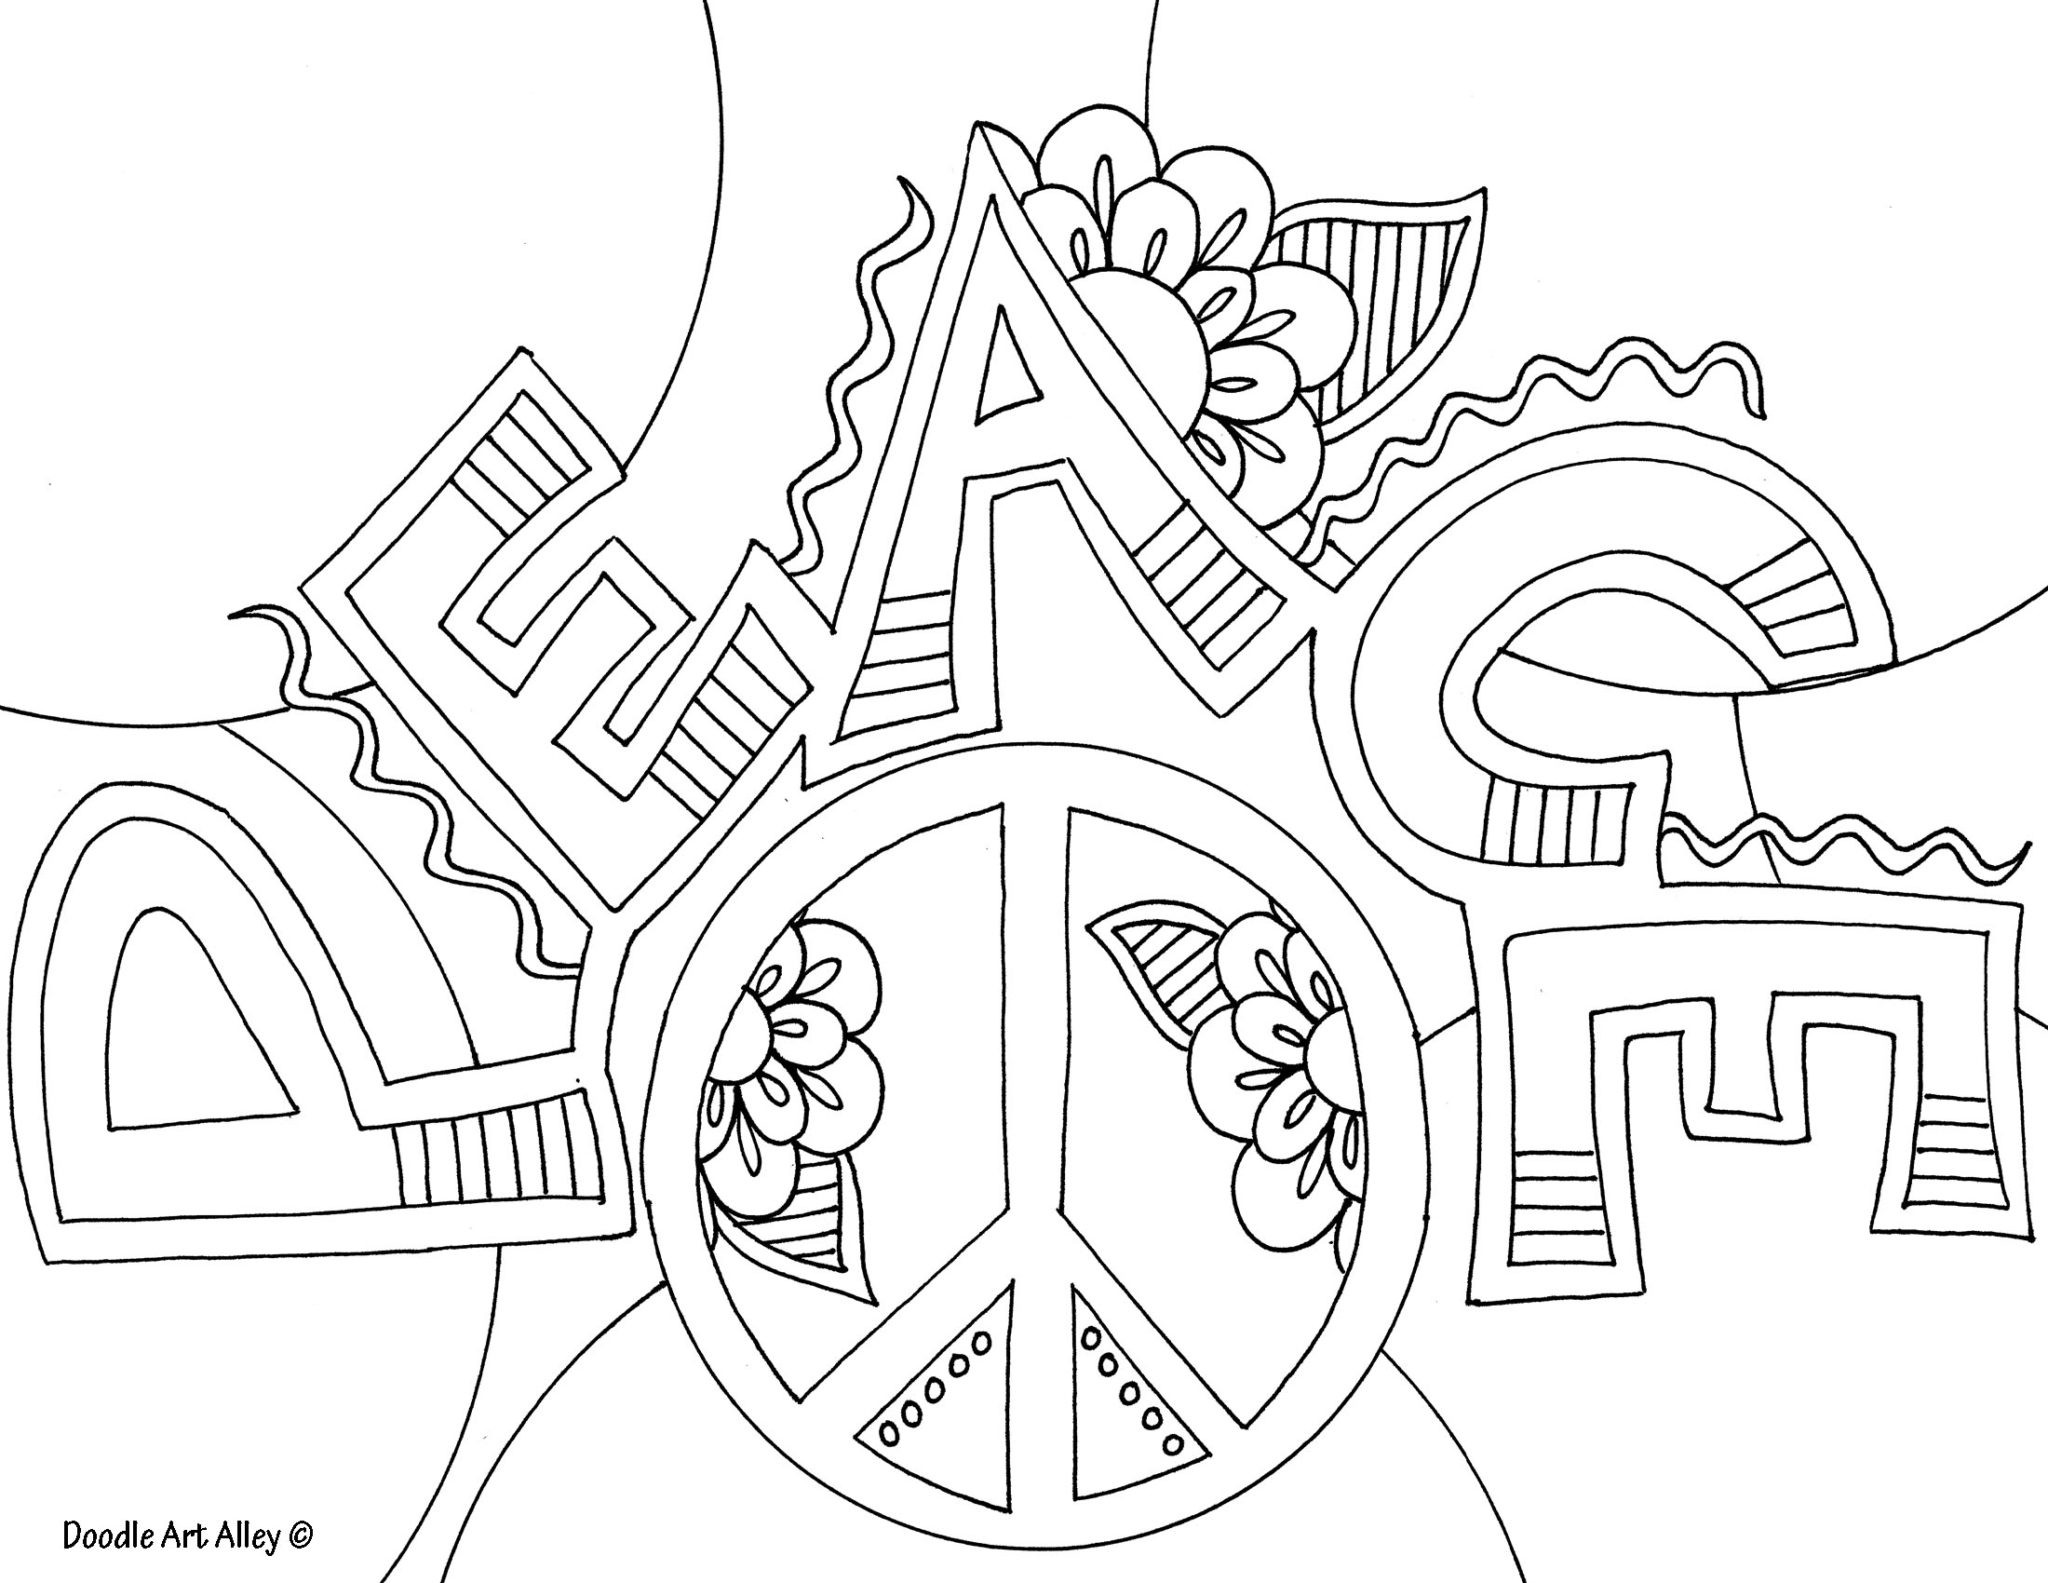 Quote Coloring Pages For Kids
 be inspired Wet Winter Afternoon – colouring in with the